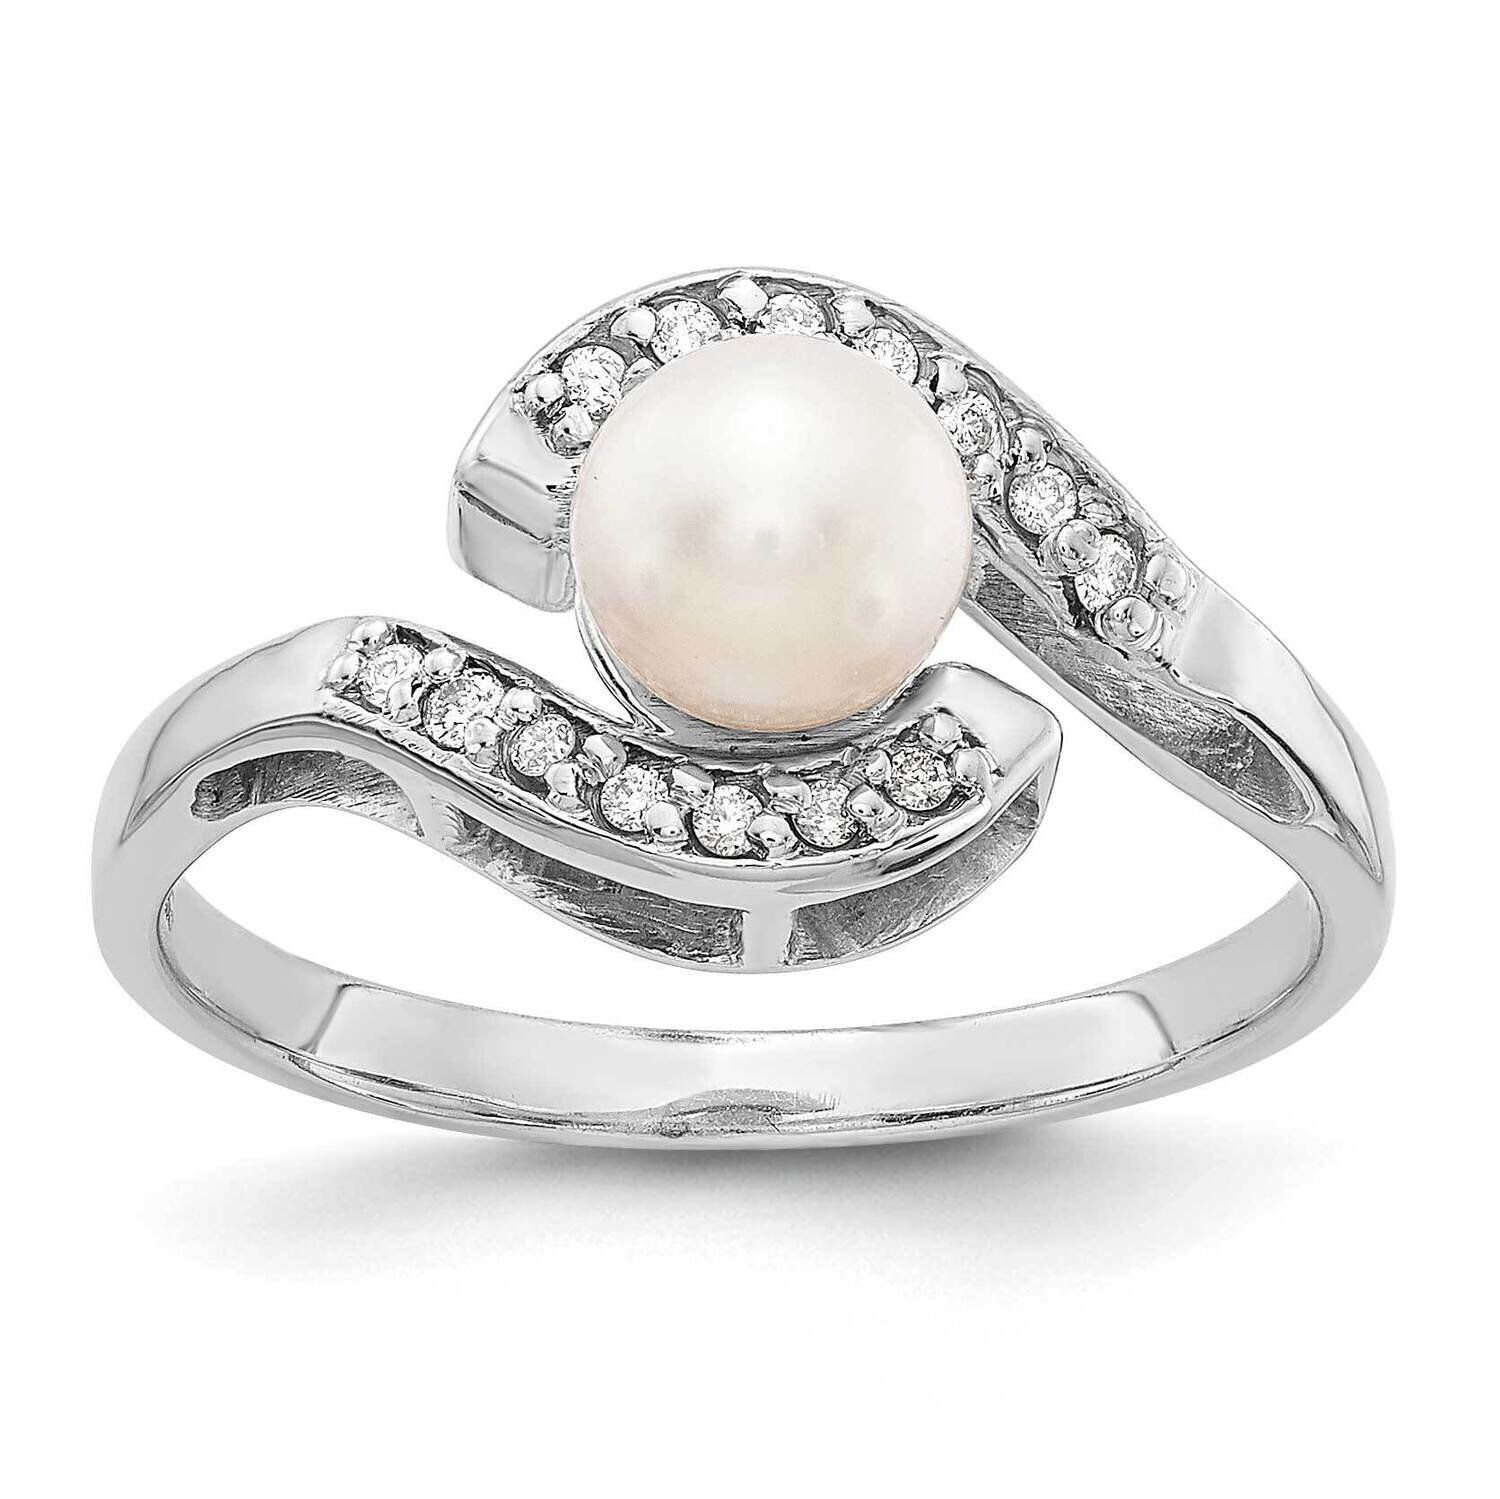 5.5mm Fw Cultured Pearl Aaa Diamond Ring 14k White Gold Y4387PL/AAA